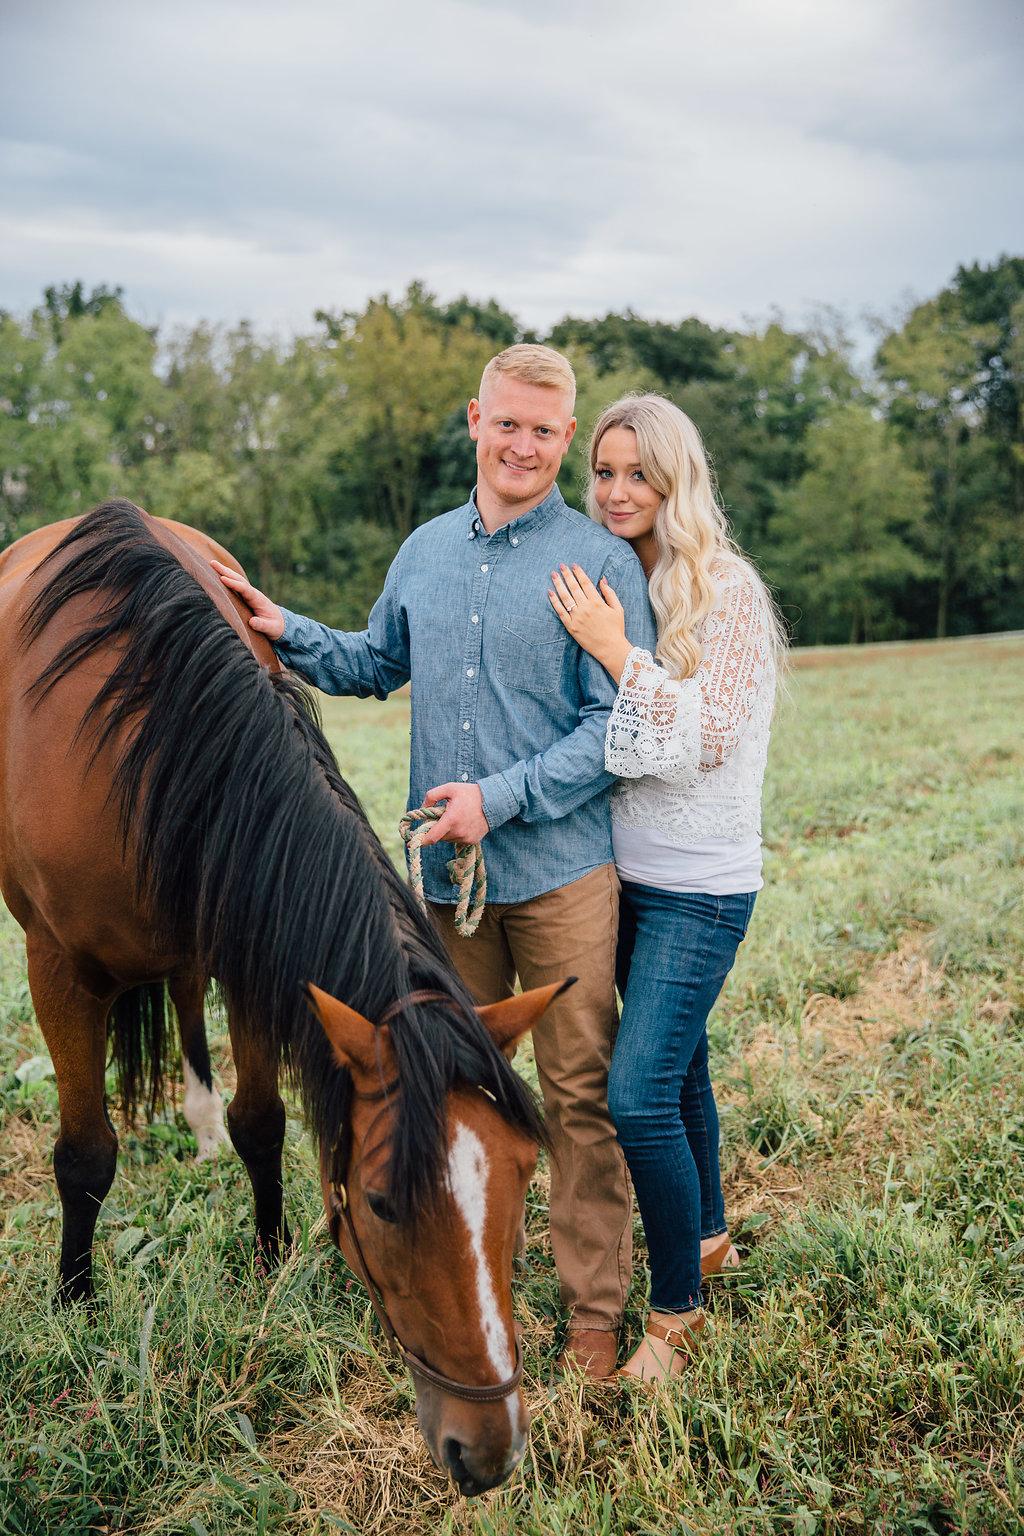 Rustic Farm Engagement Session by Alison Leigh Photography Philly In Love Philadelphia Wedding Blog Venues Vendors